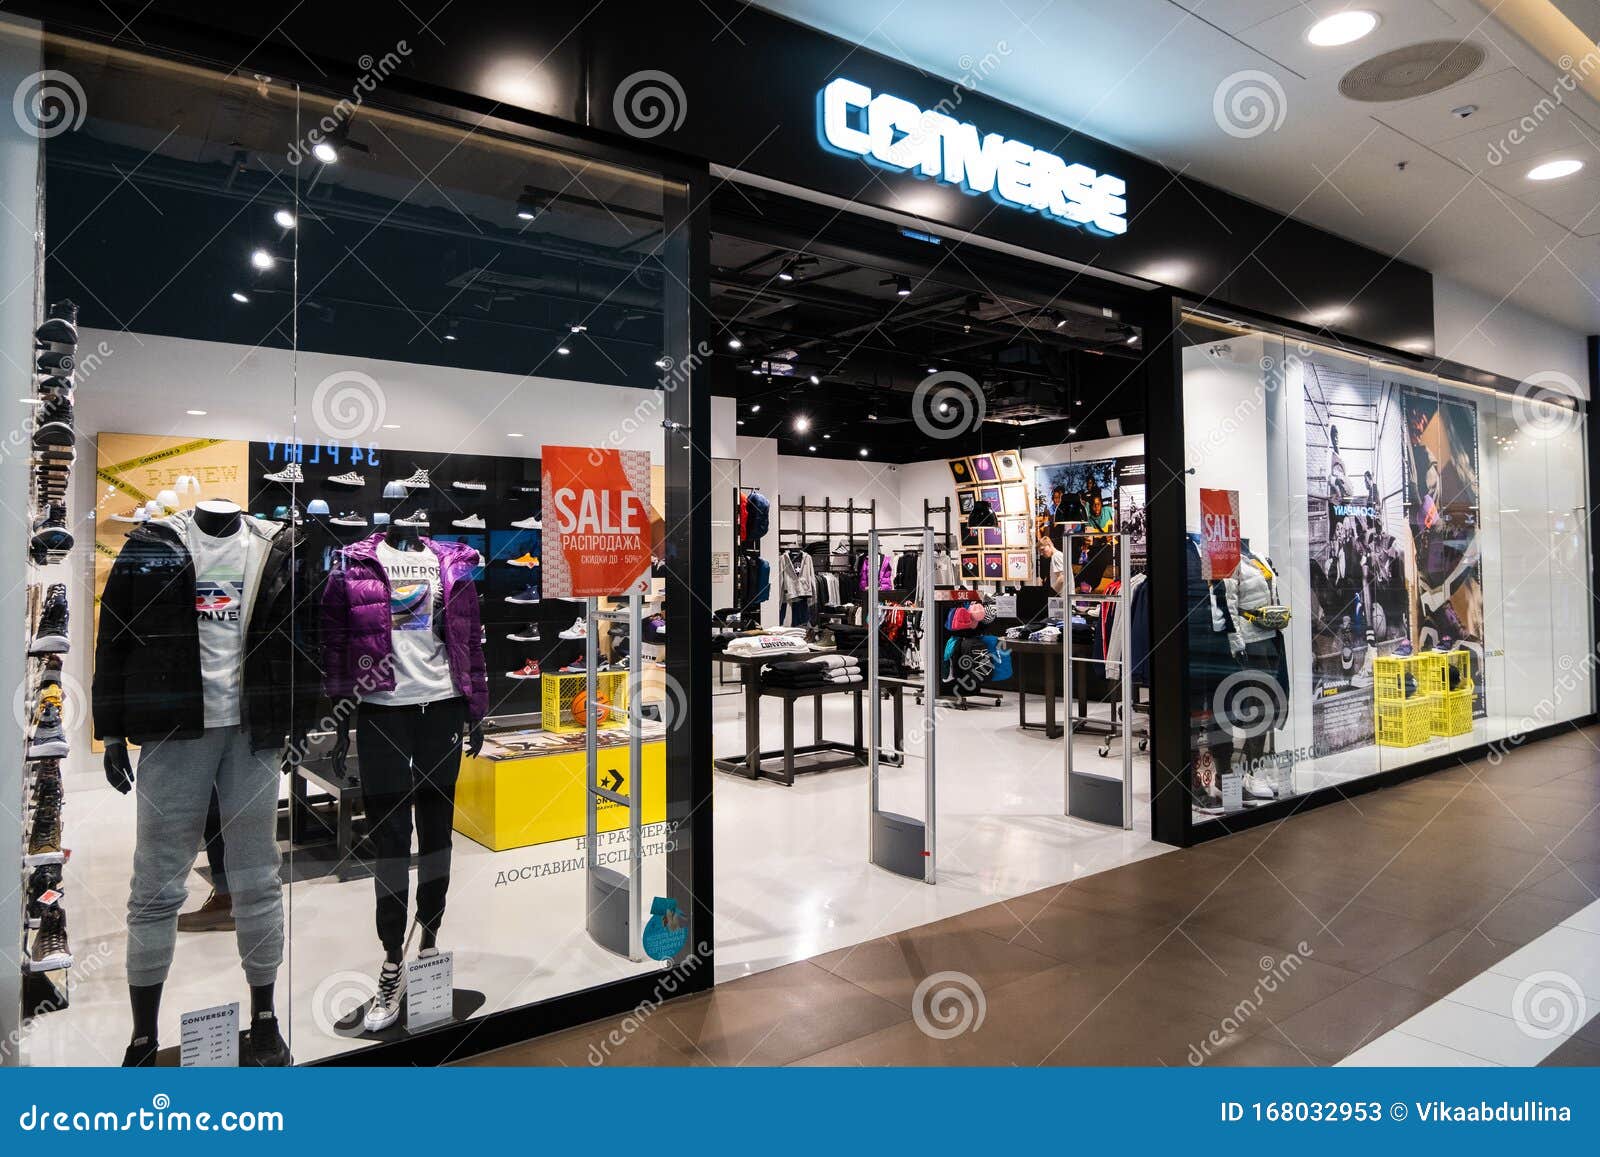 Converse Store In Galeria Shopping Mall 